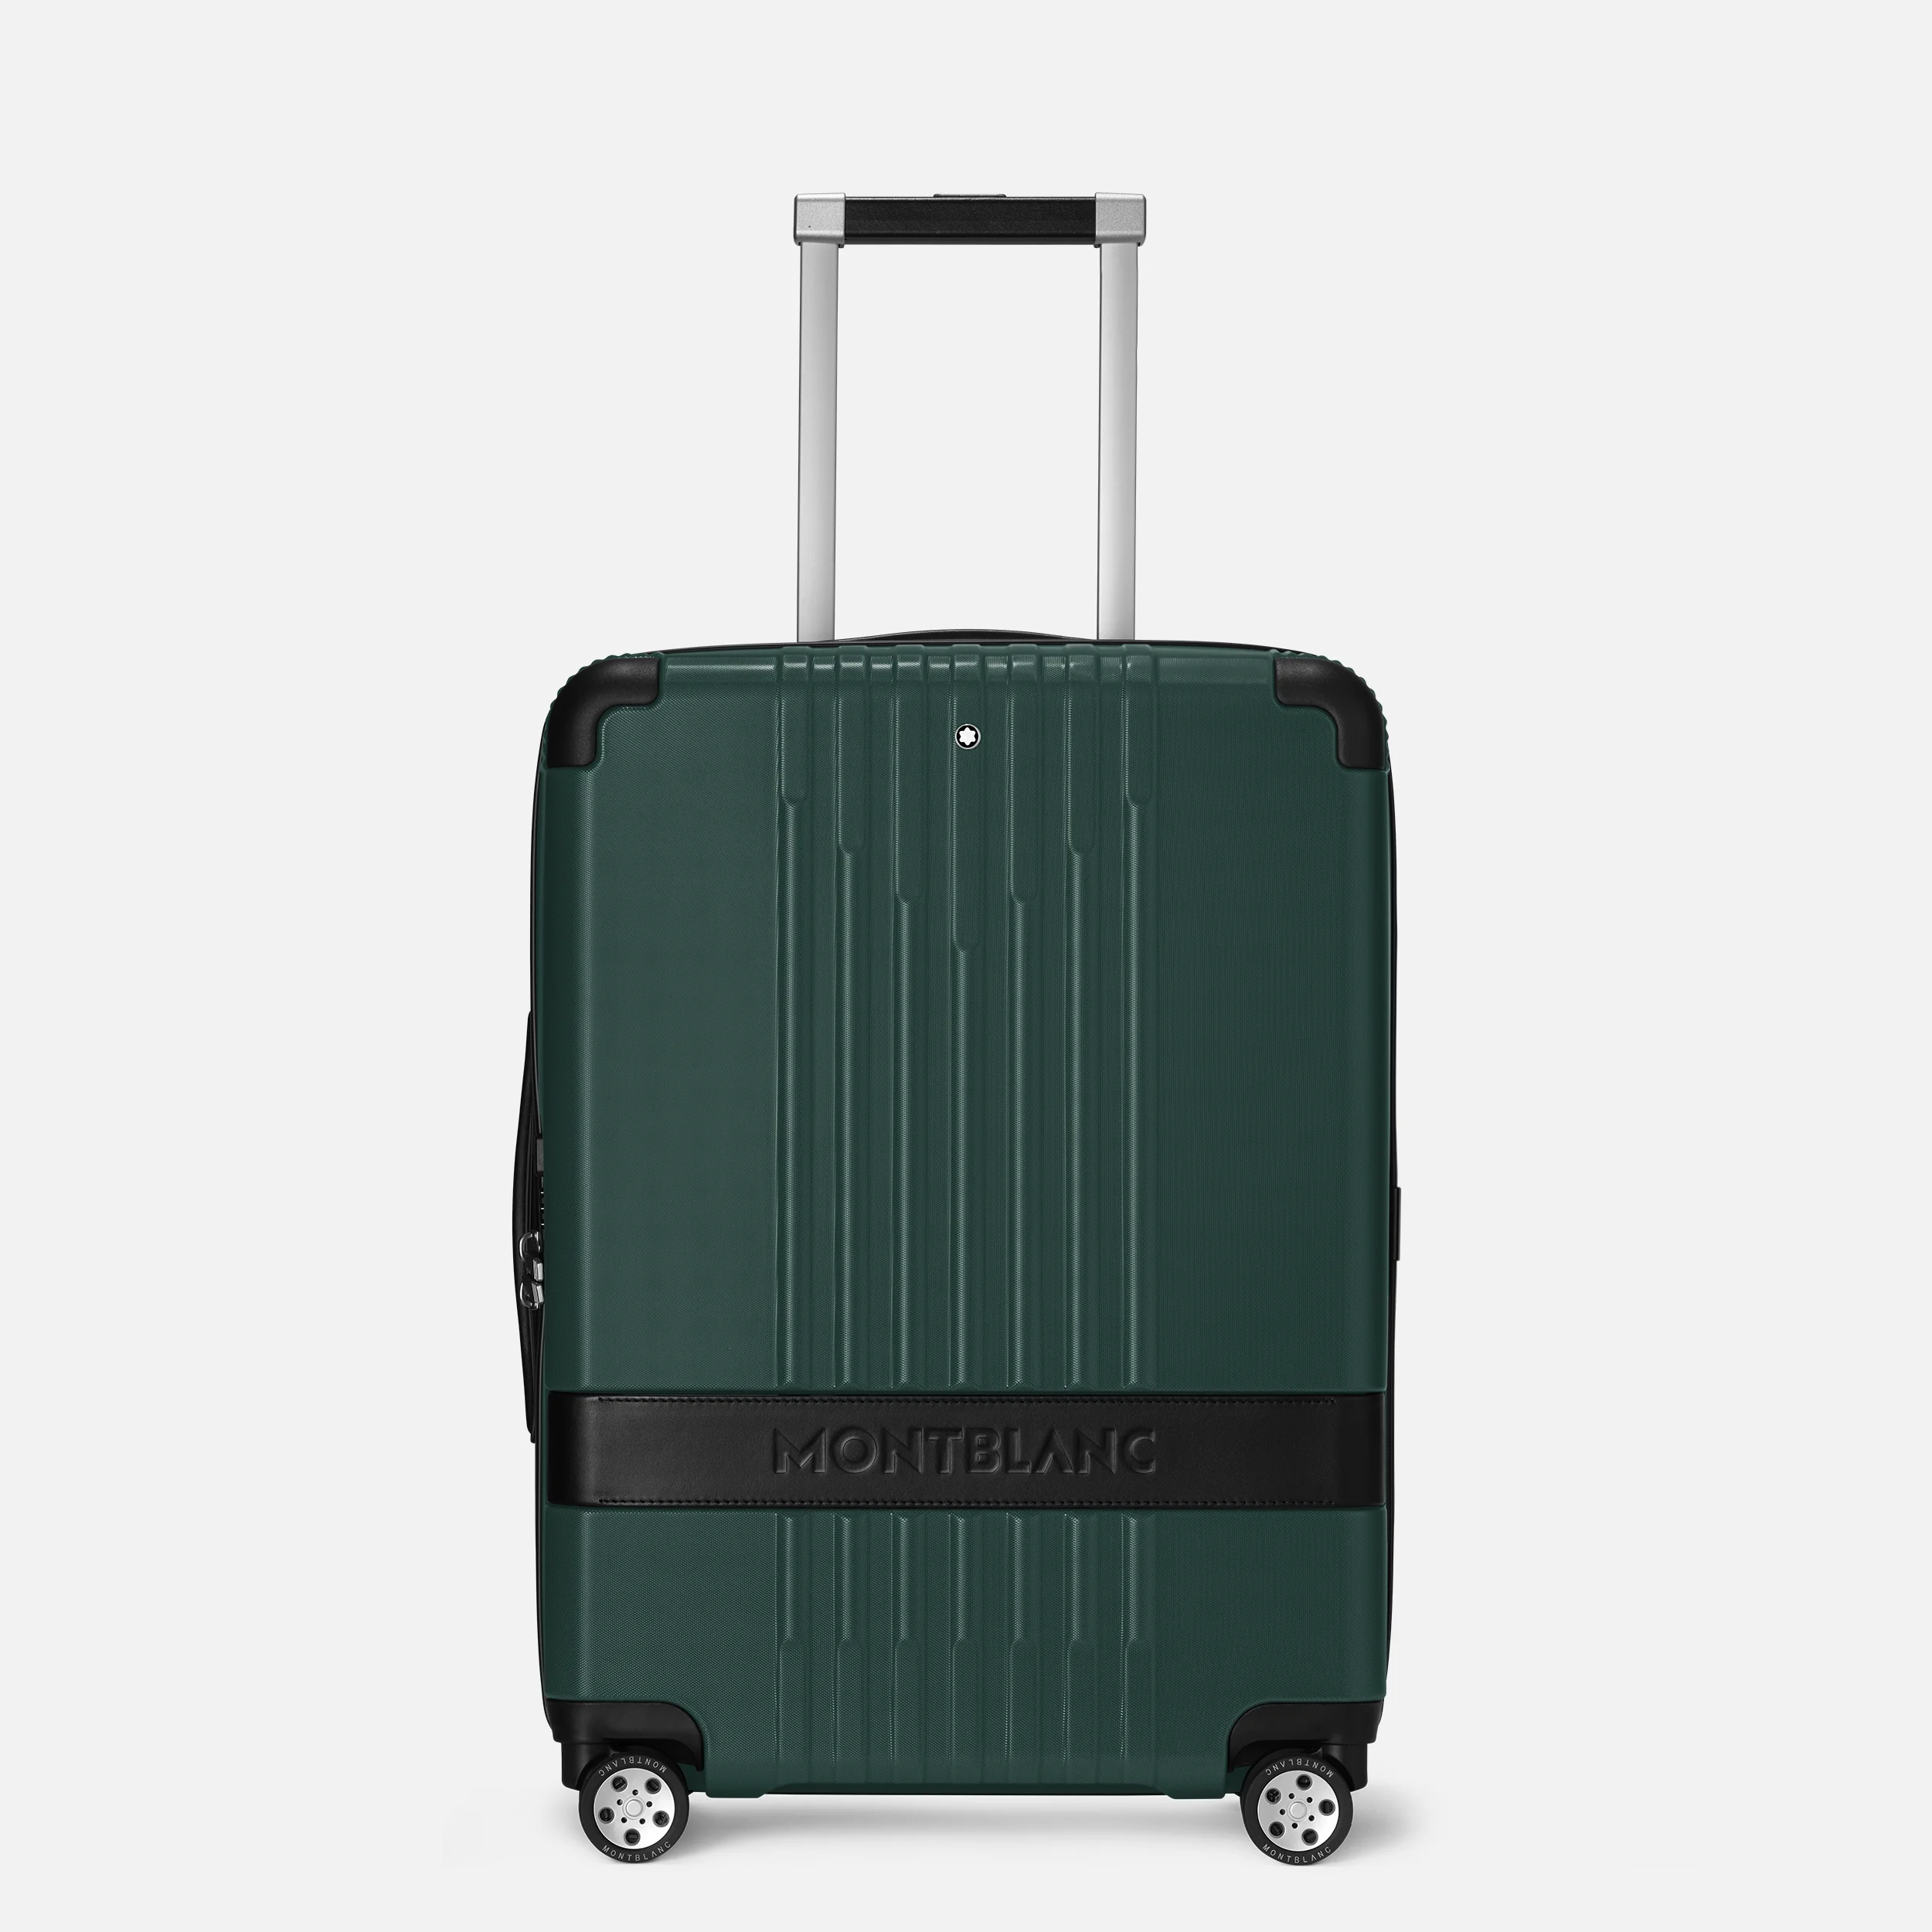 Montblanc MY4810 Cabin Trolley British Green - Pencraft the boutique